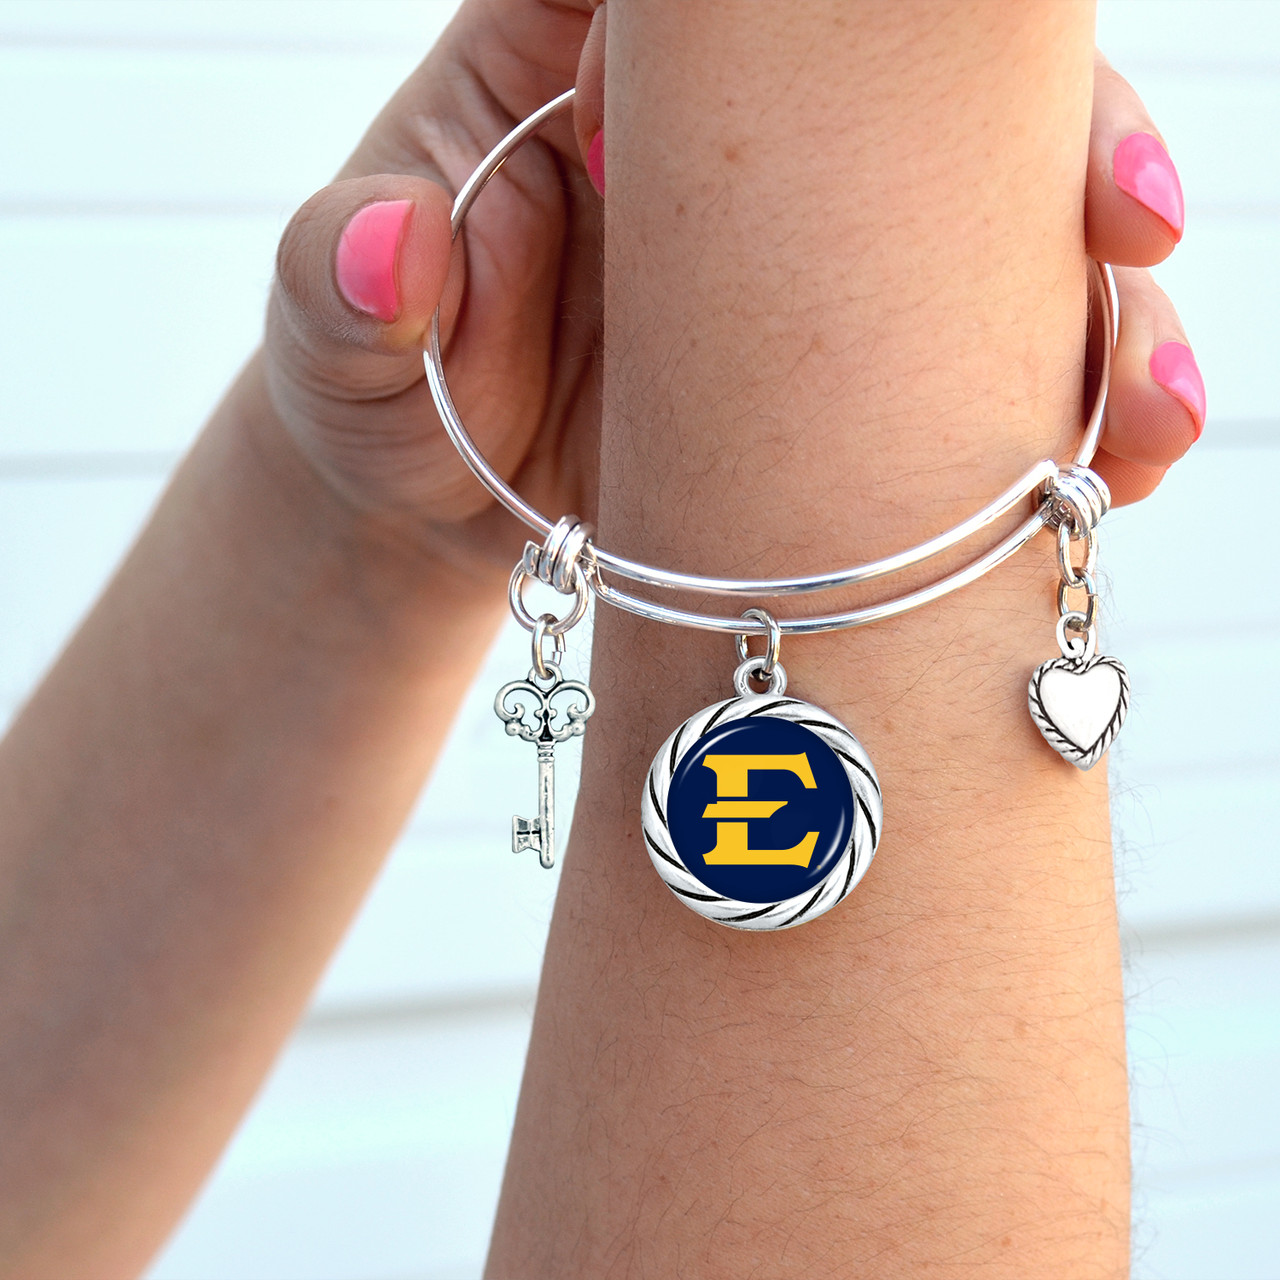 East Tennessee State Buccaneers Bracelet- Twisted Rope